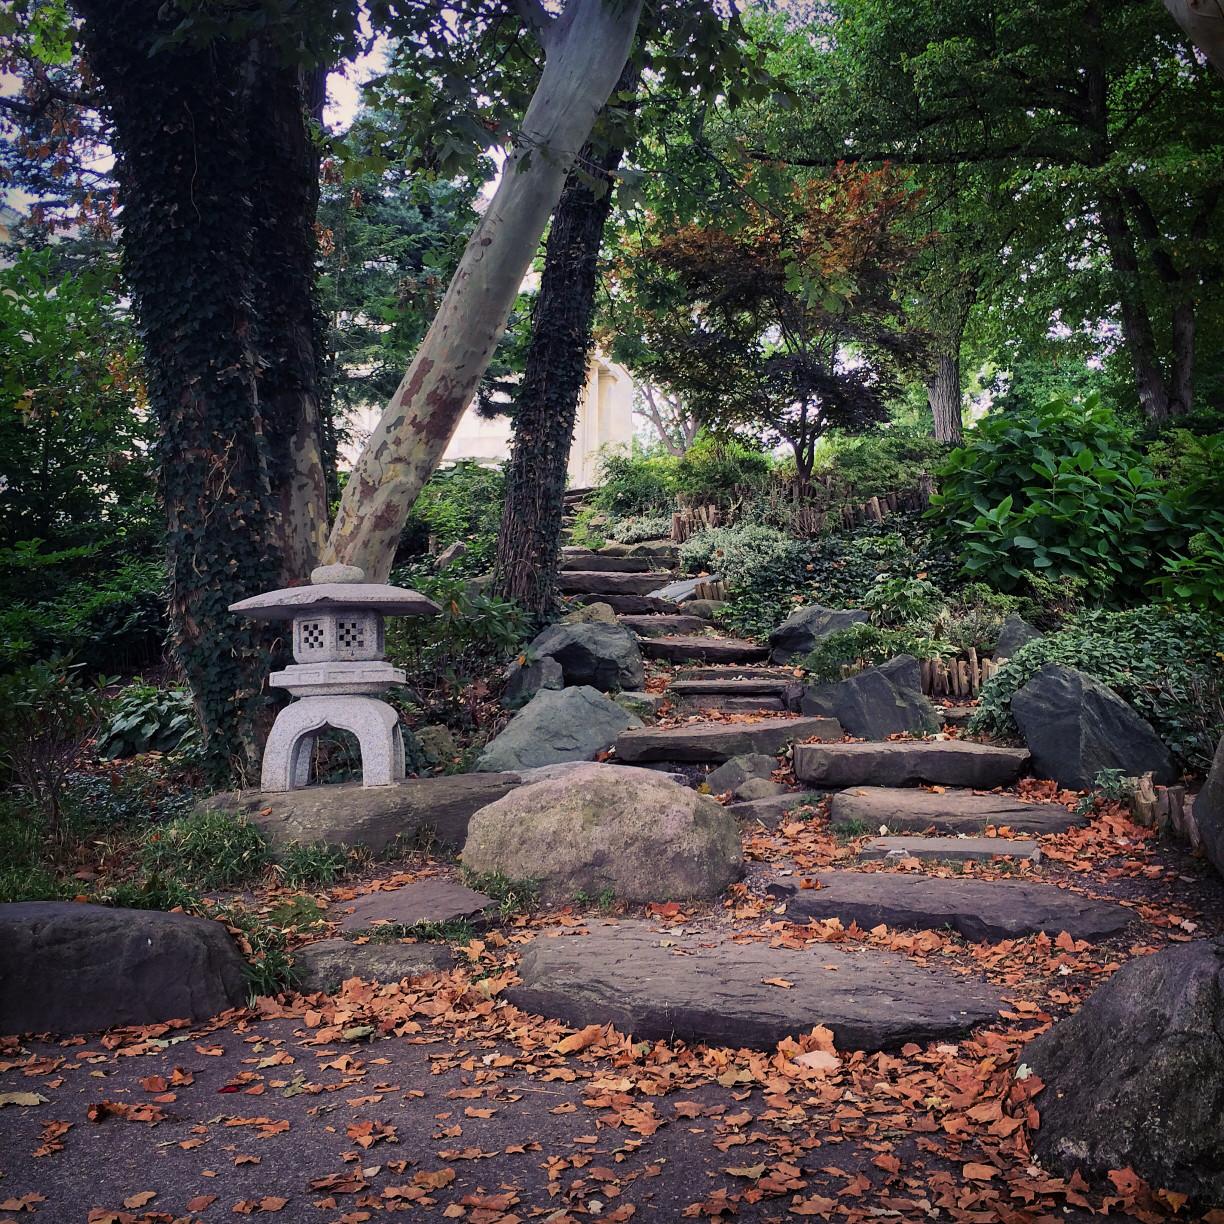 Dark steps made of flat rocks, autumn leaves scattered on the ground surrounding them.